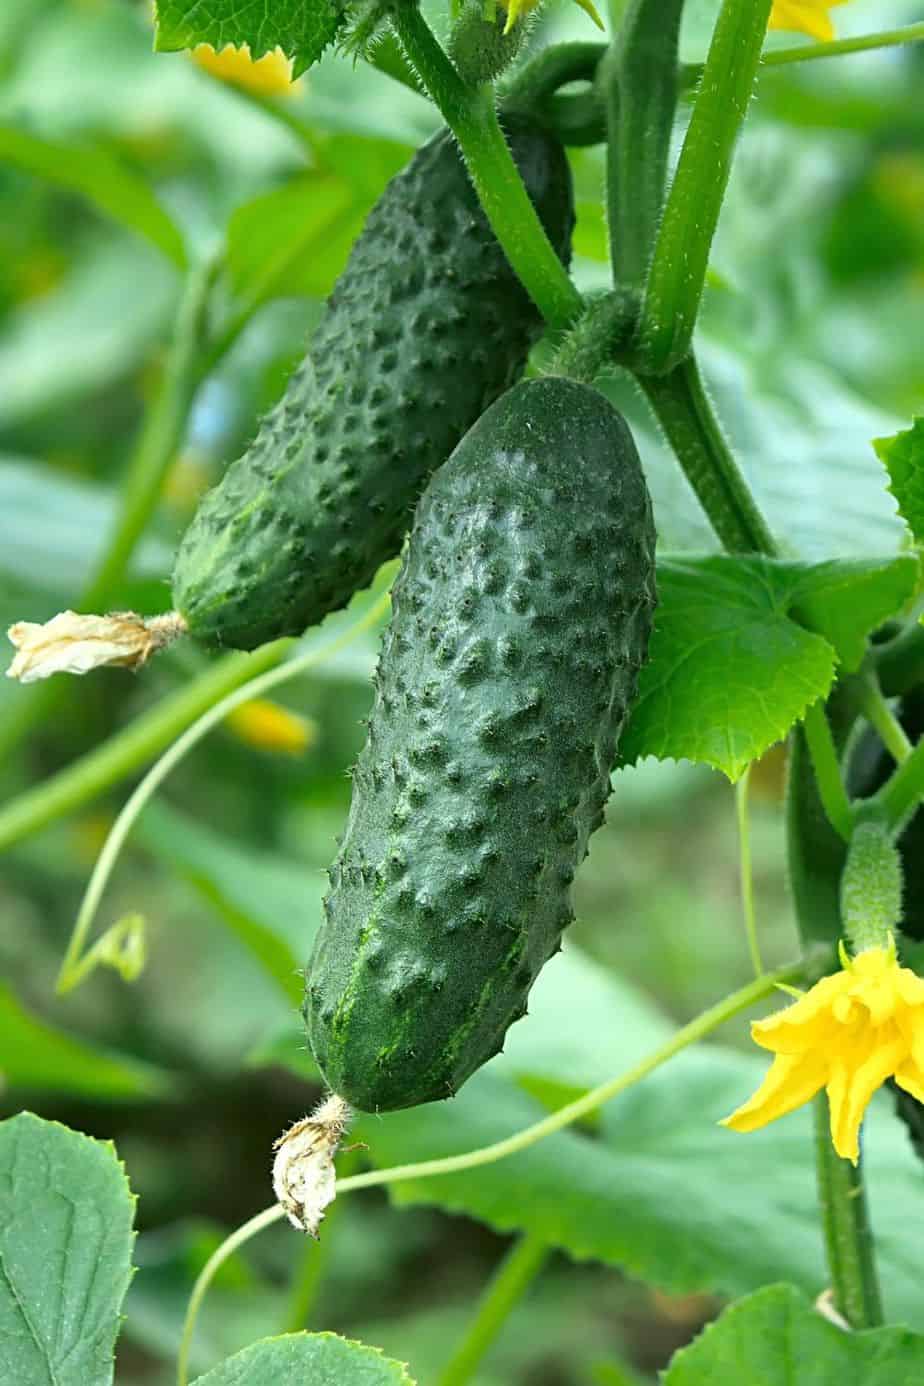 Cucumber is one of the vegetables you can grow in raised beds that is perfect for beginner gardeners